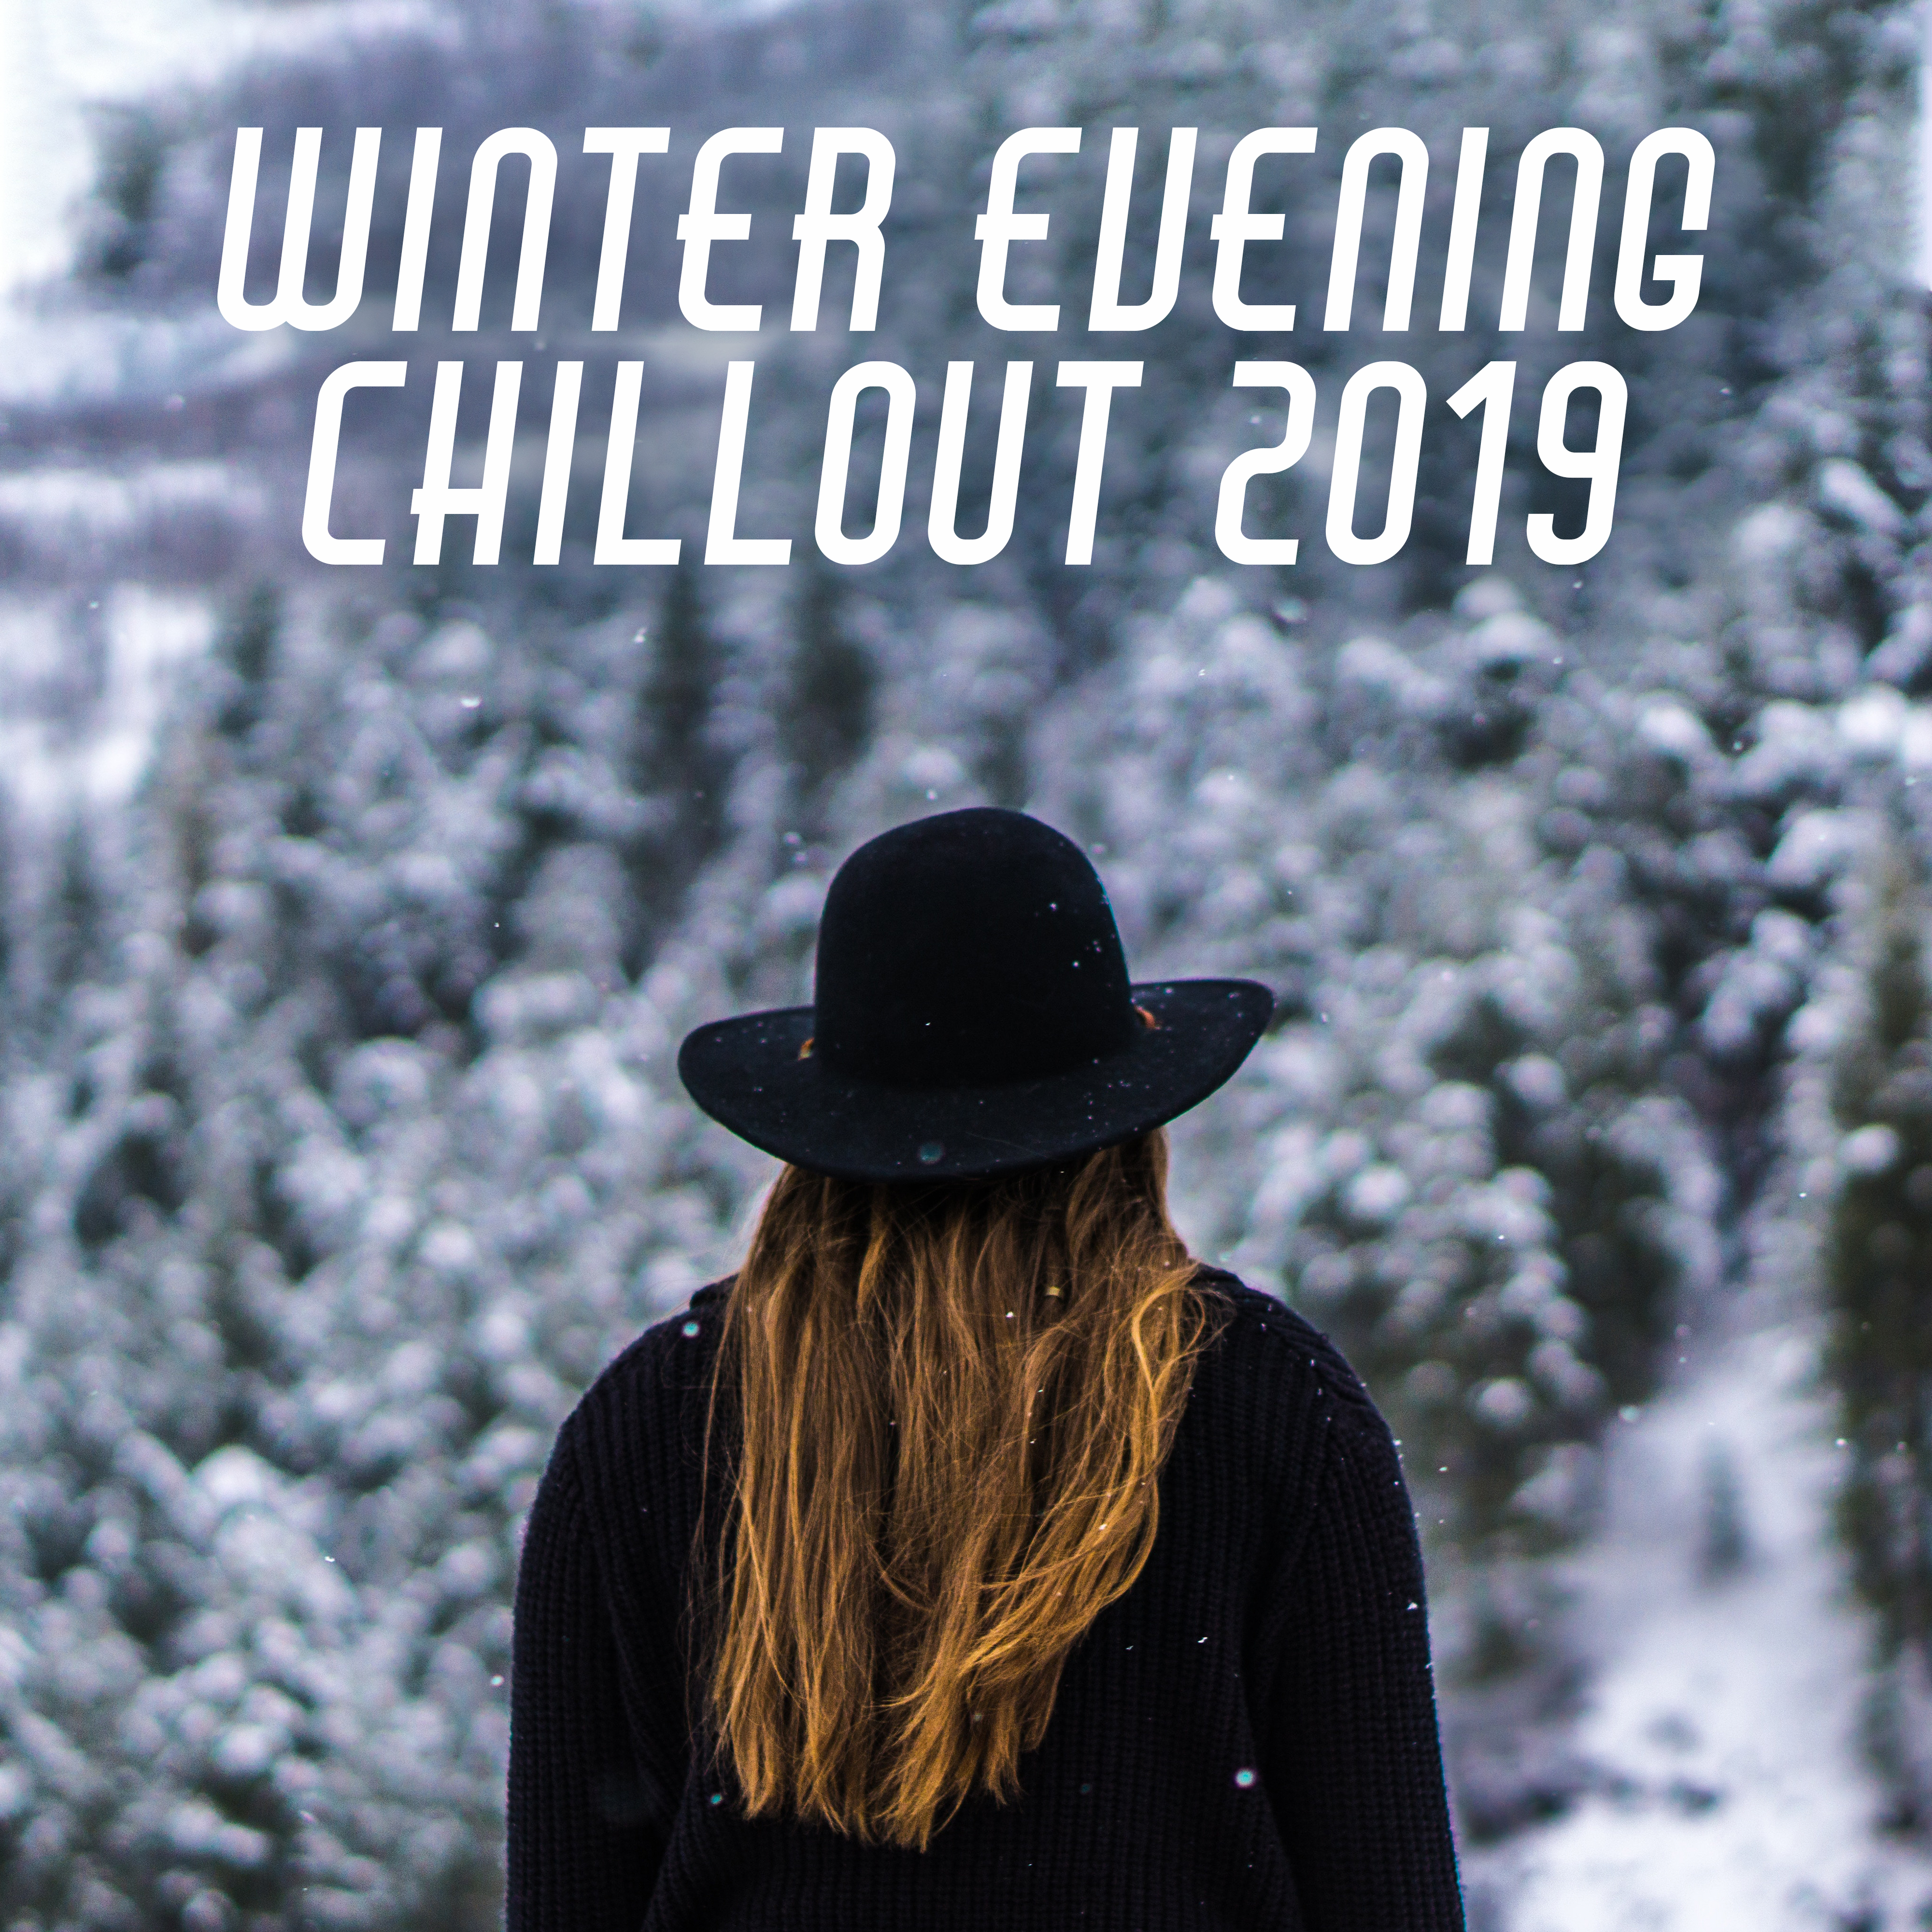 Winter Evening Chillout 2019